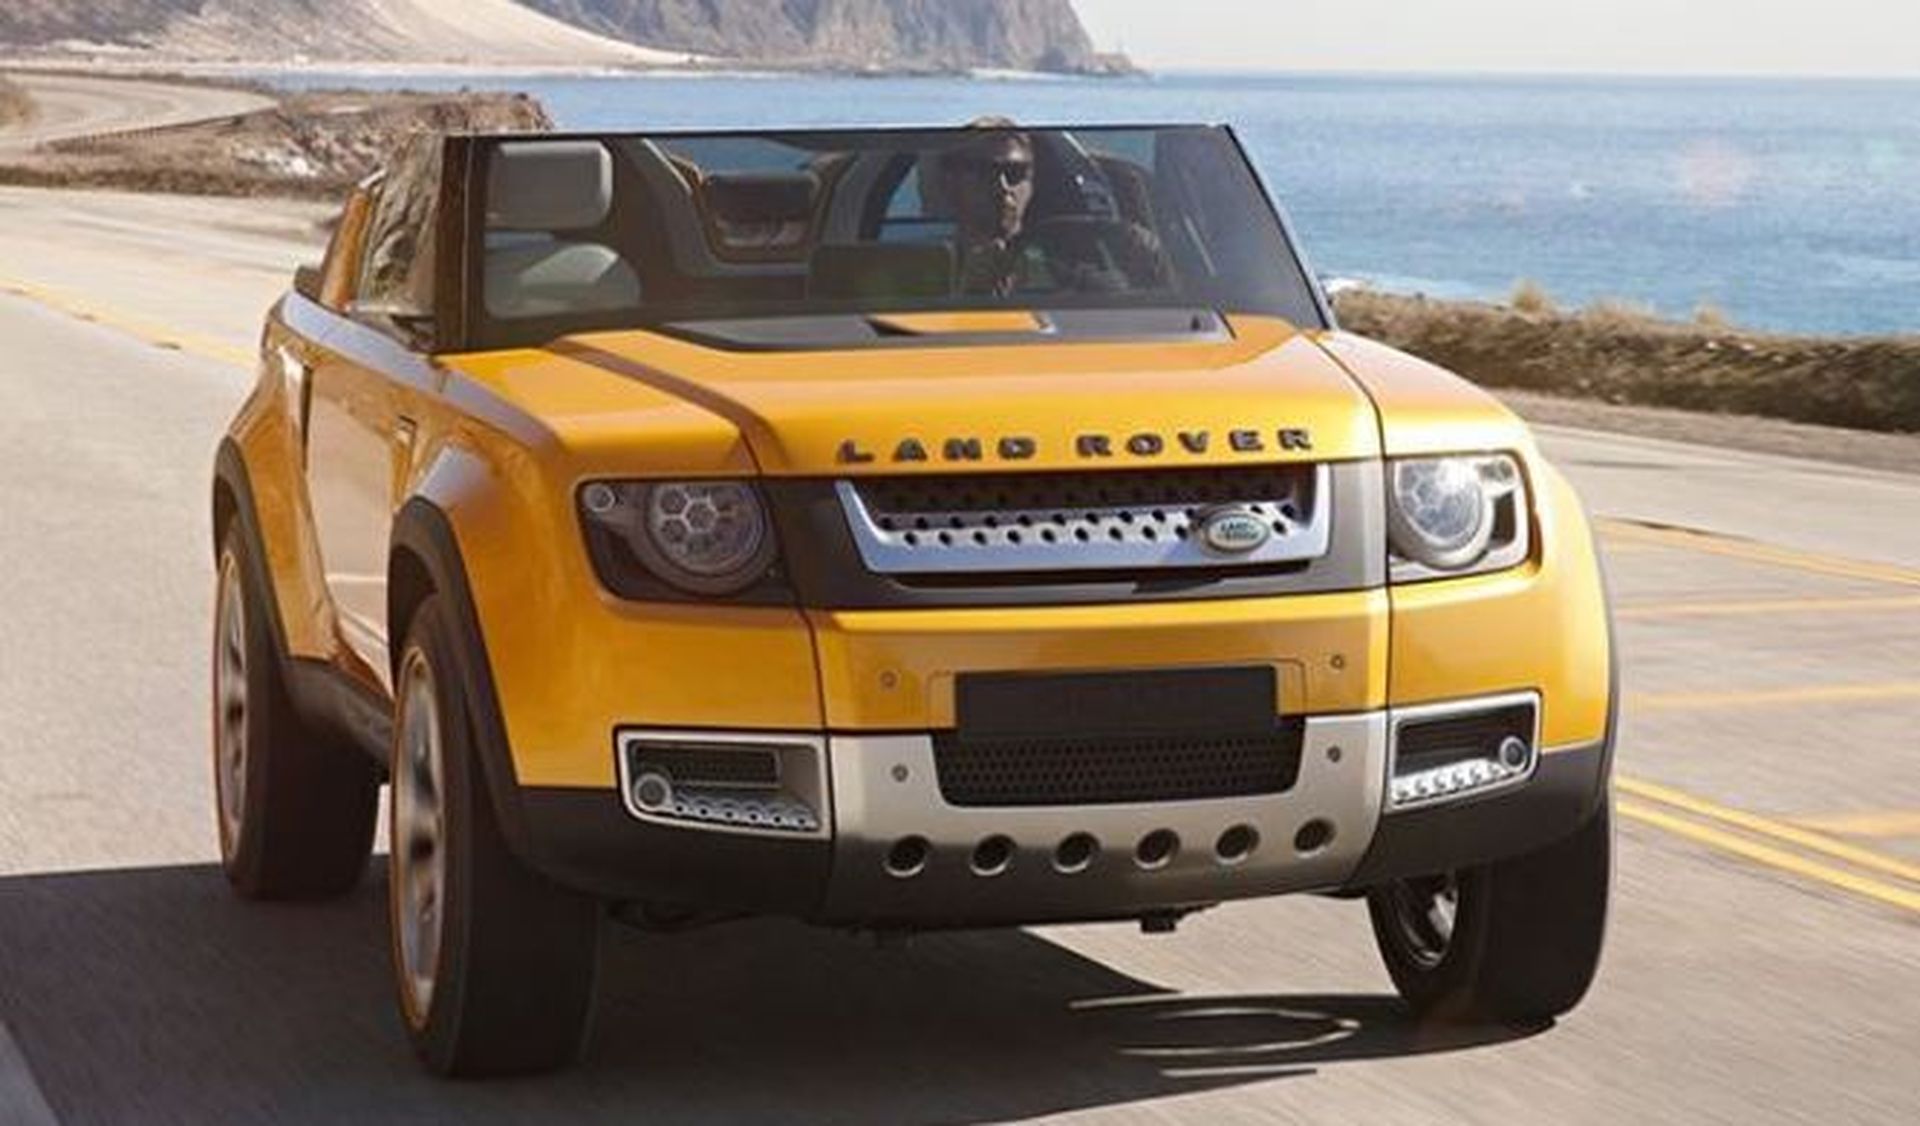 Land Rover DC 100 frontal